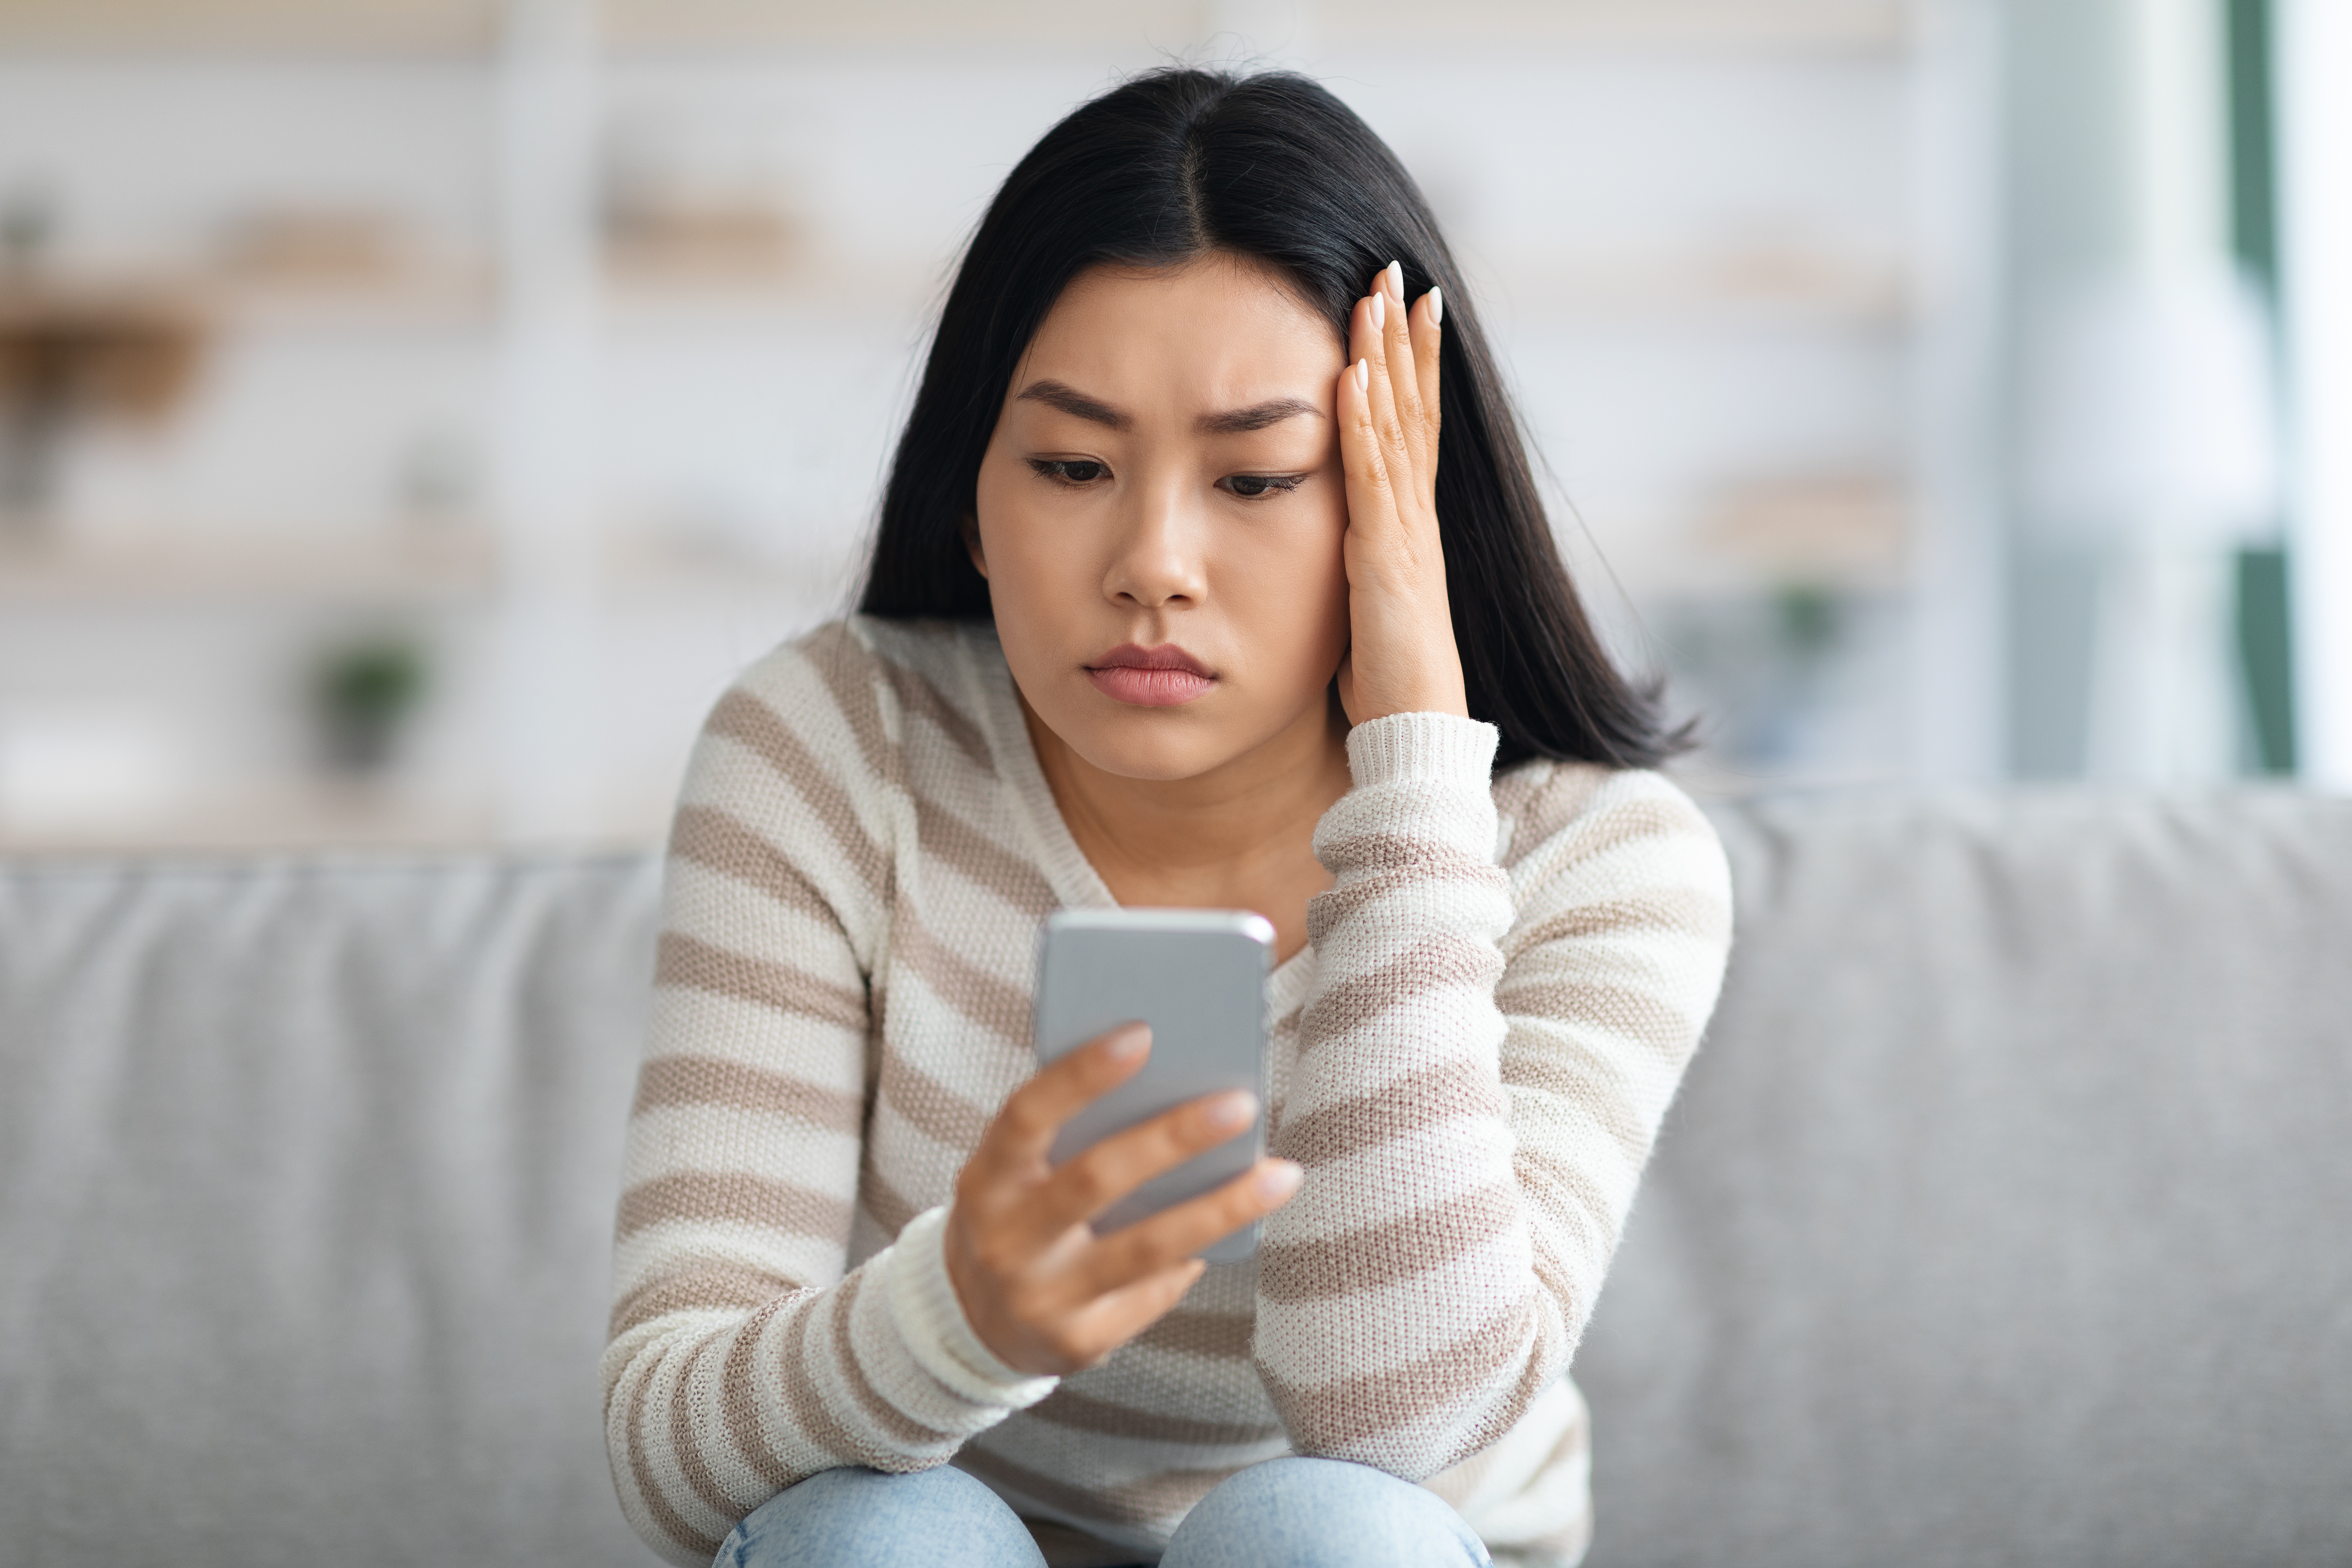 Distressed Asian woman on a couch, holding a smartphone with a worried expression, receiving bad news on the screen.